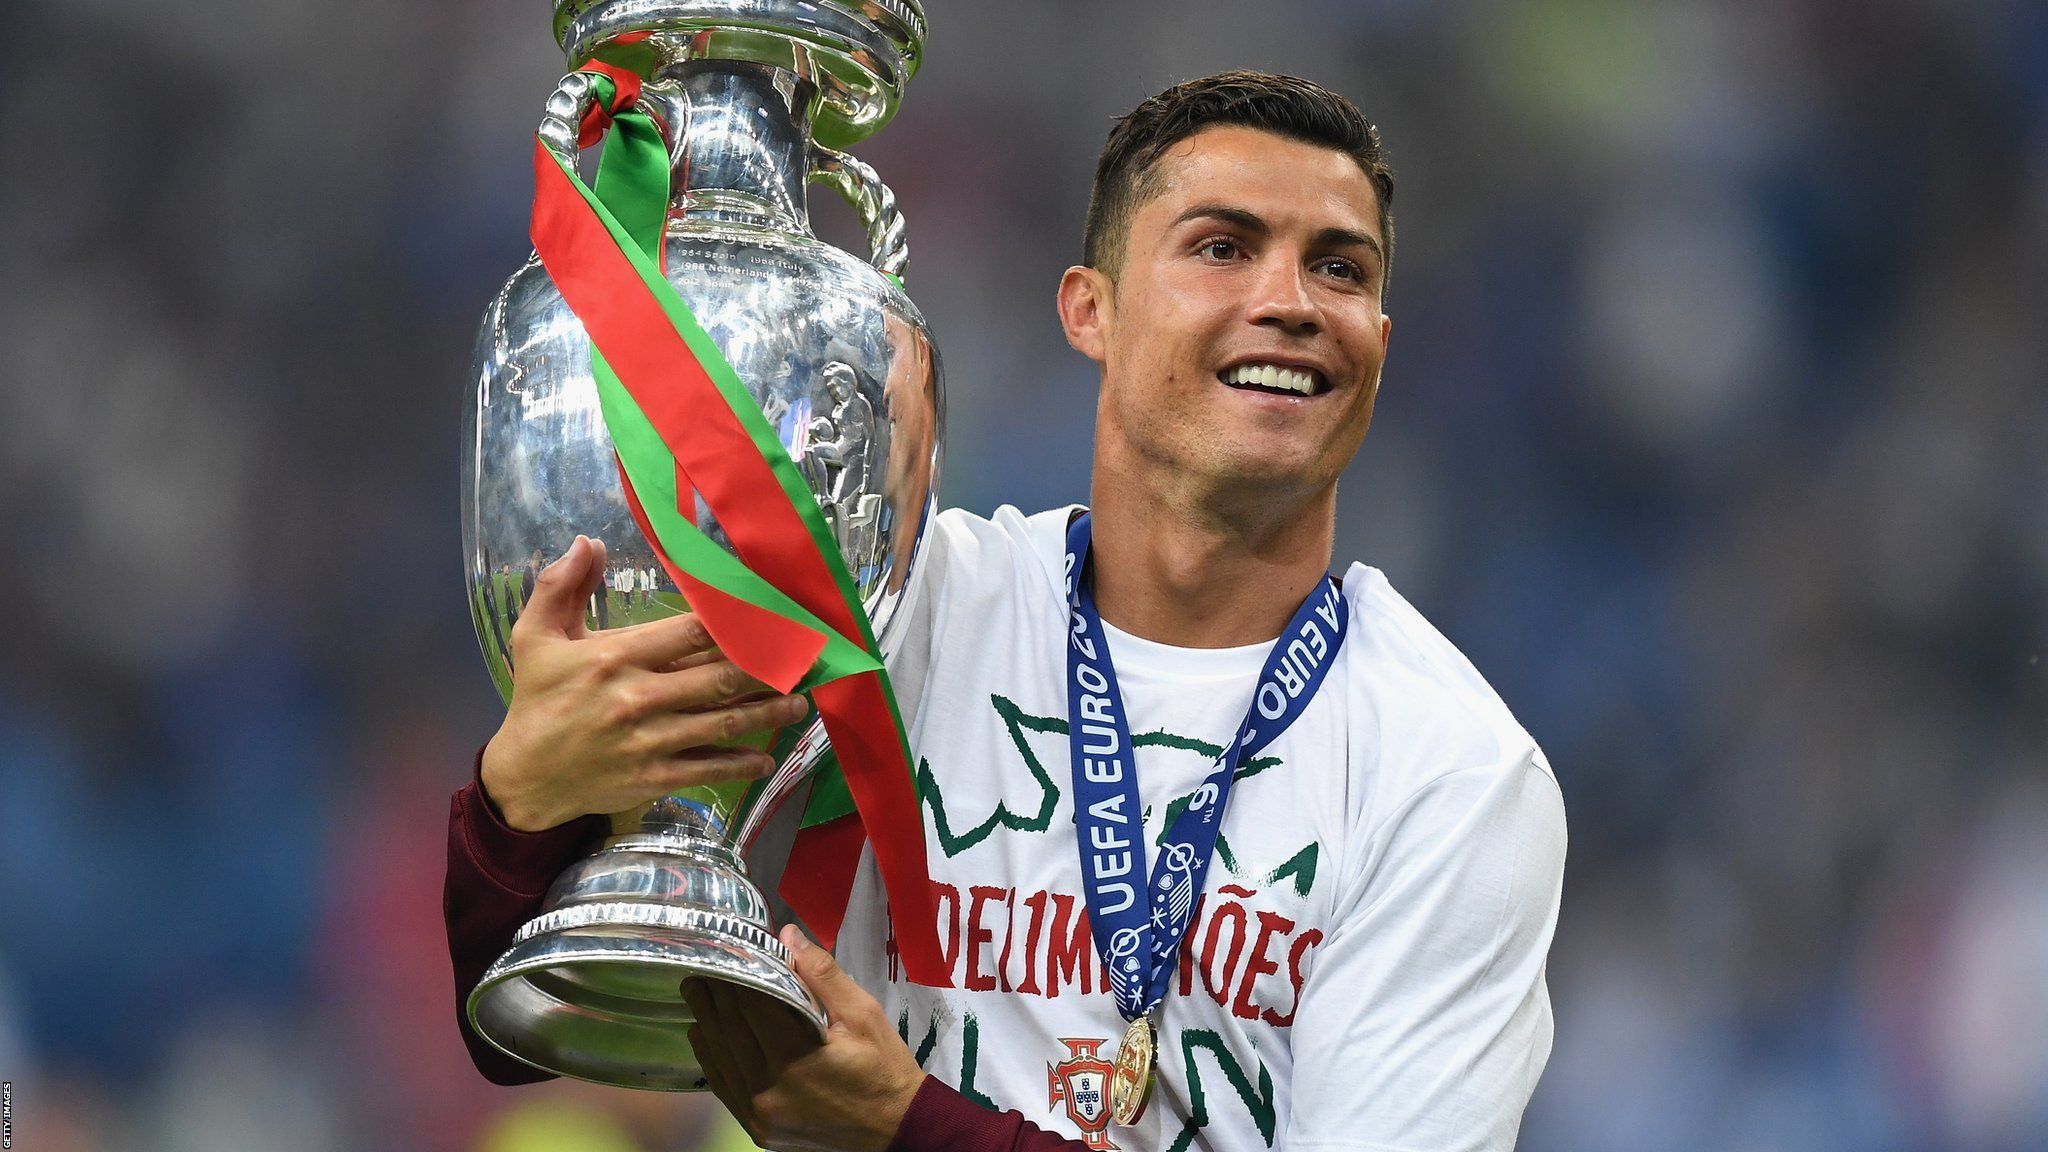 Cristiano Ronaldo of Portugal holds the Henri Delaunay trophy